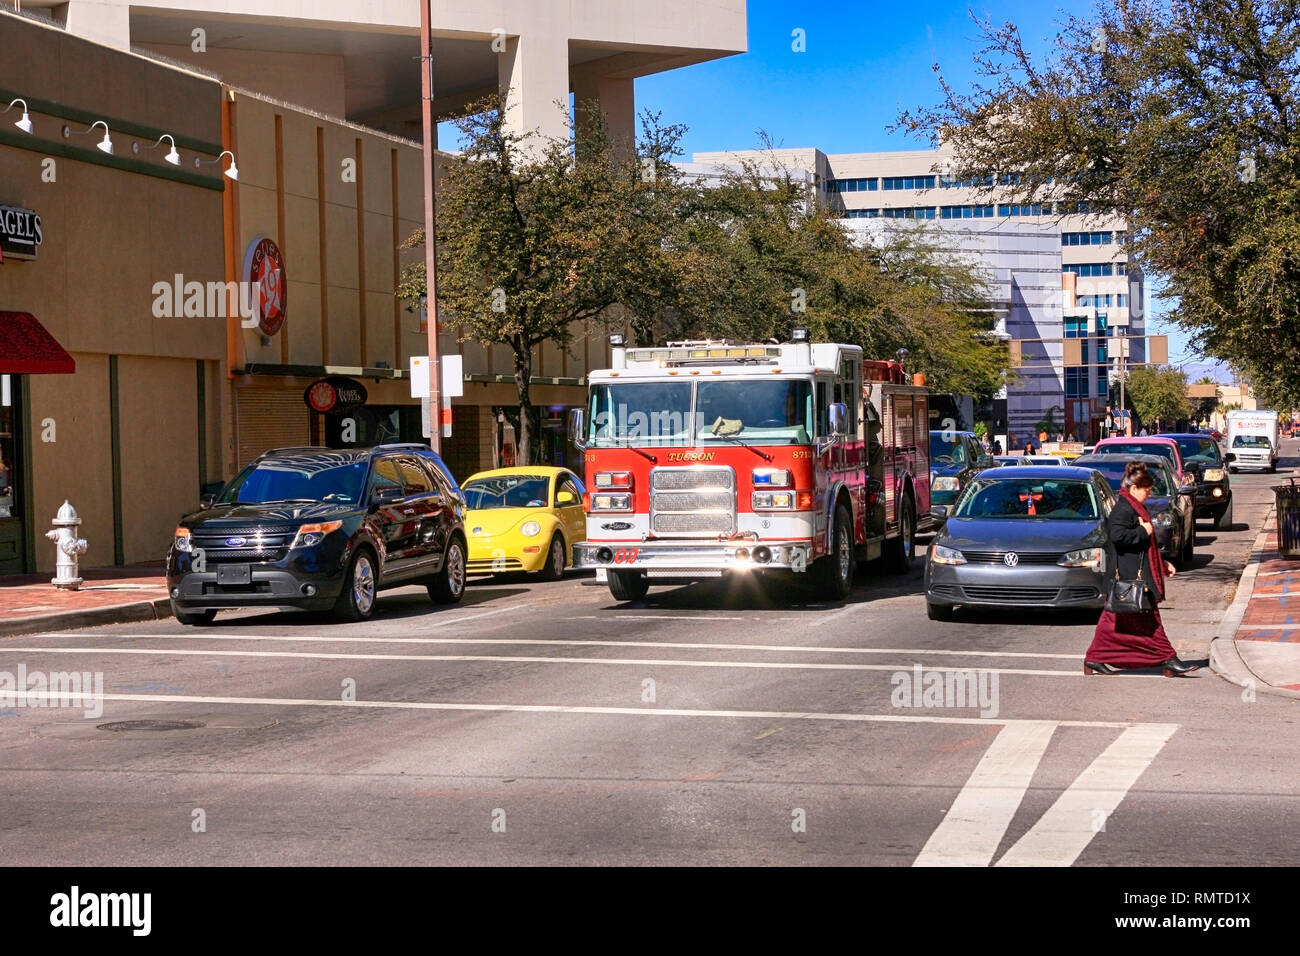 Fire truck in the middle lane of traffic in downtown Tucson Arizona Stock Photo